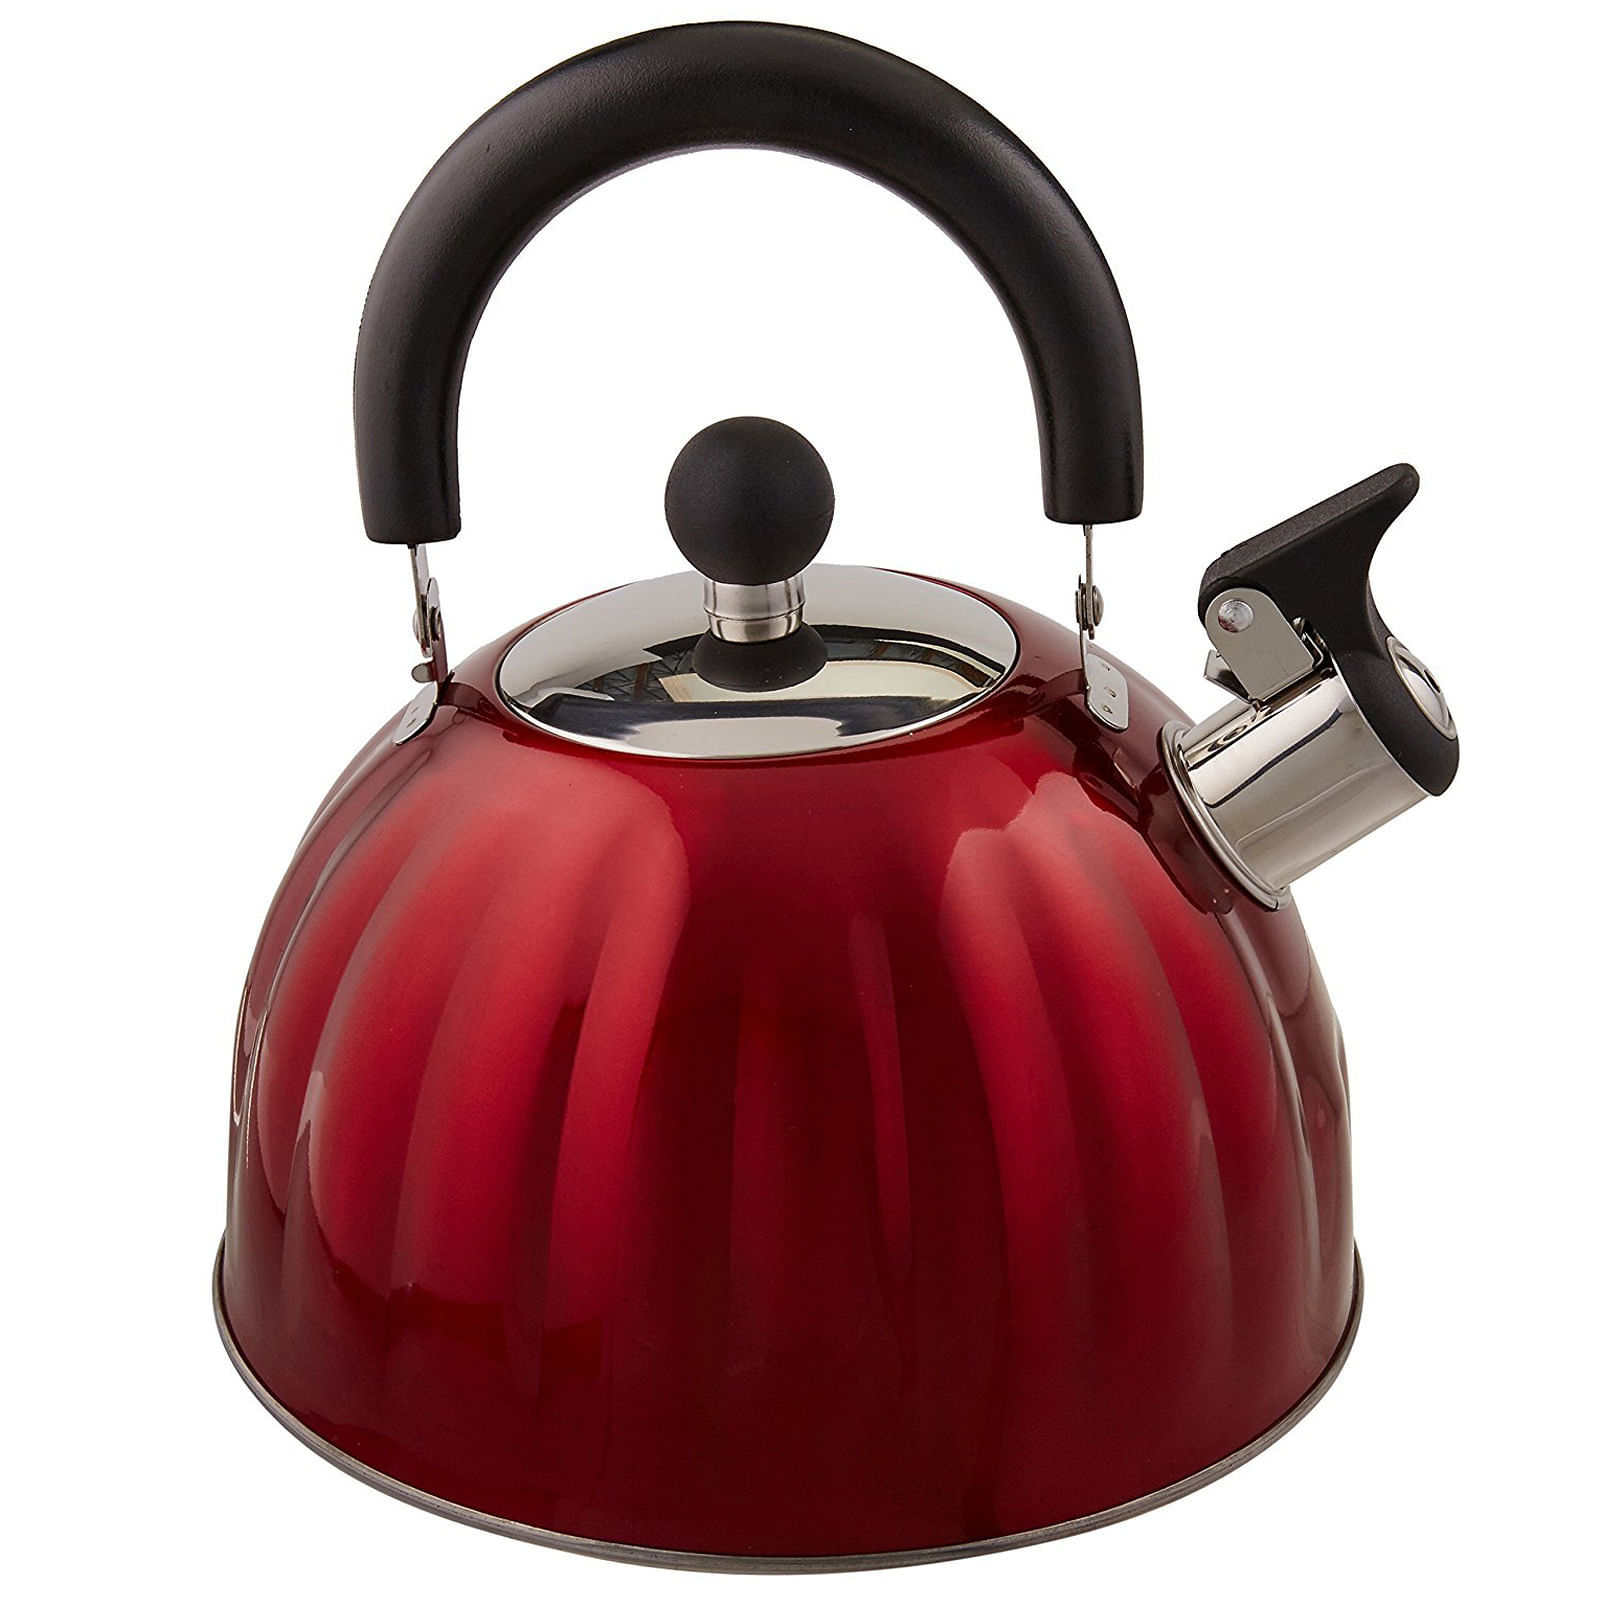 Primary image for Mr. Coffee Twining 2.1 Quart Pumpkin Tea Kettle in Red